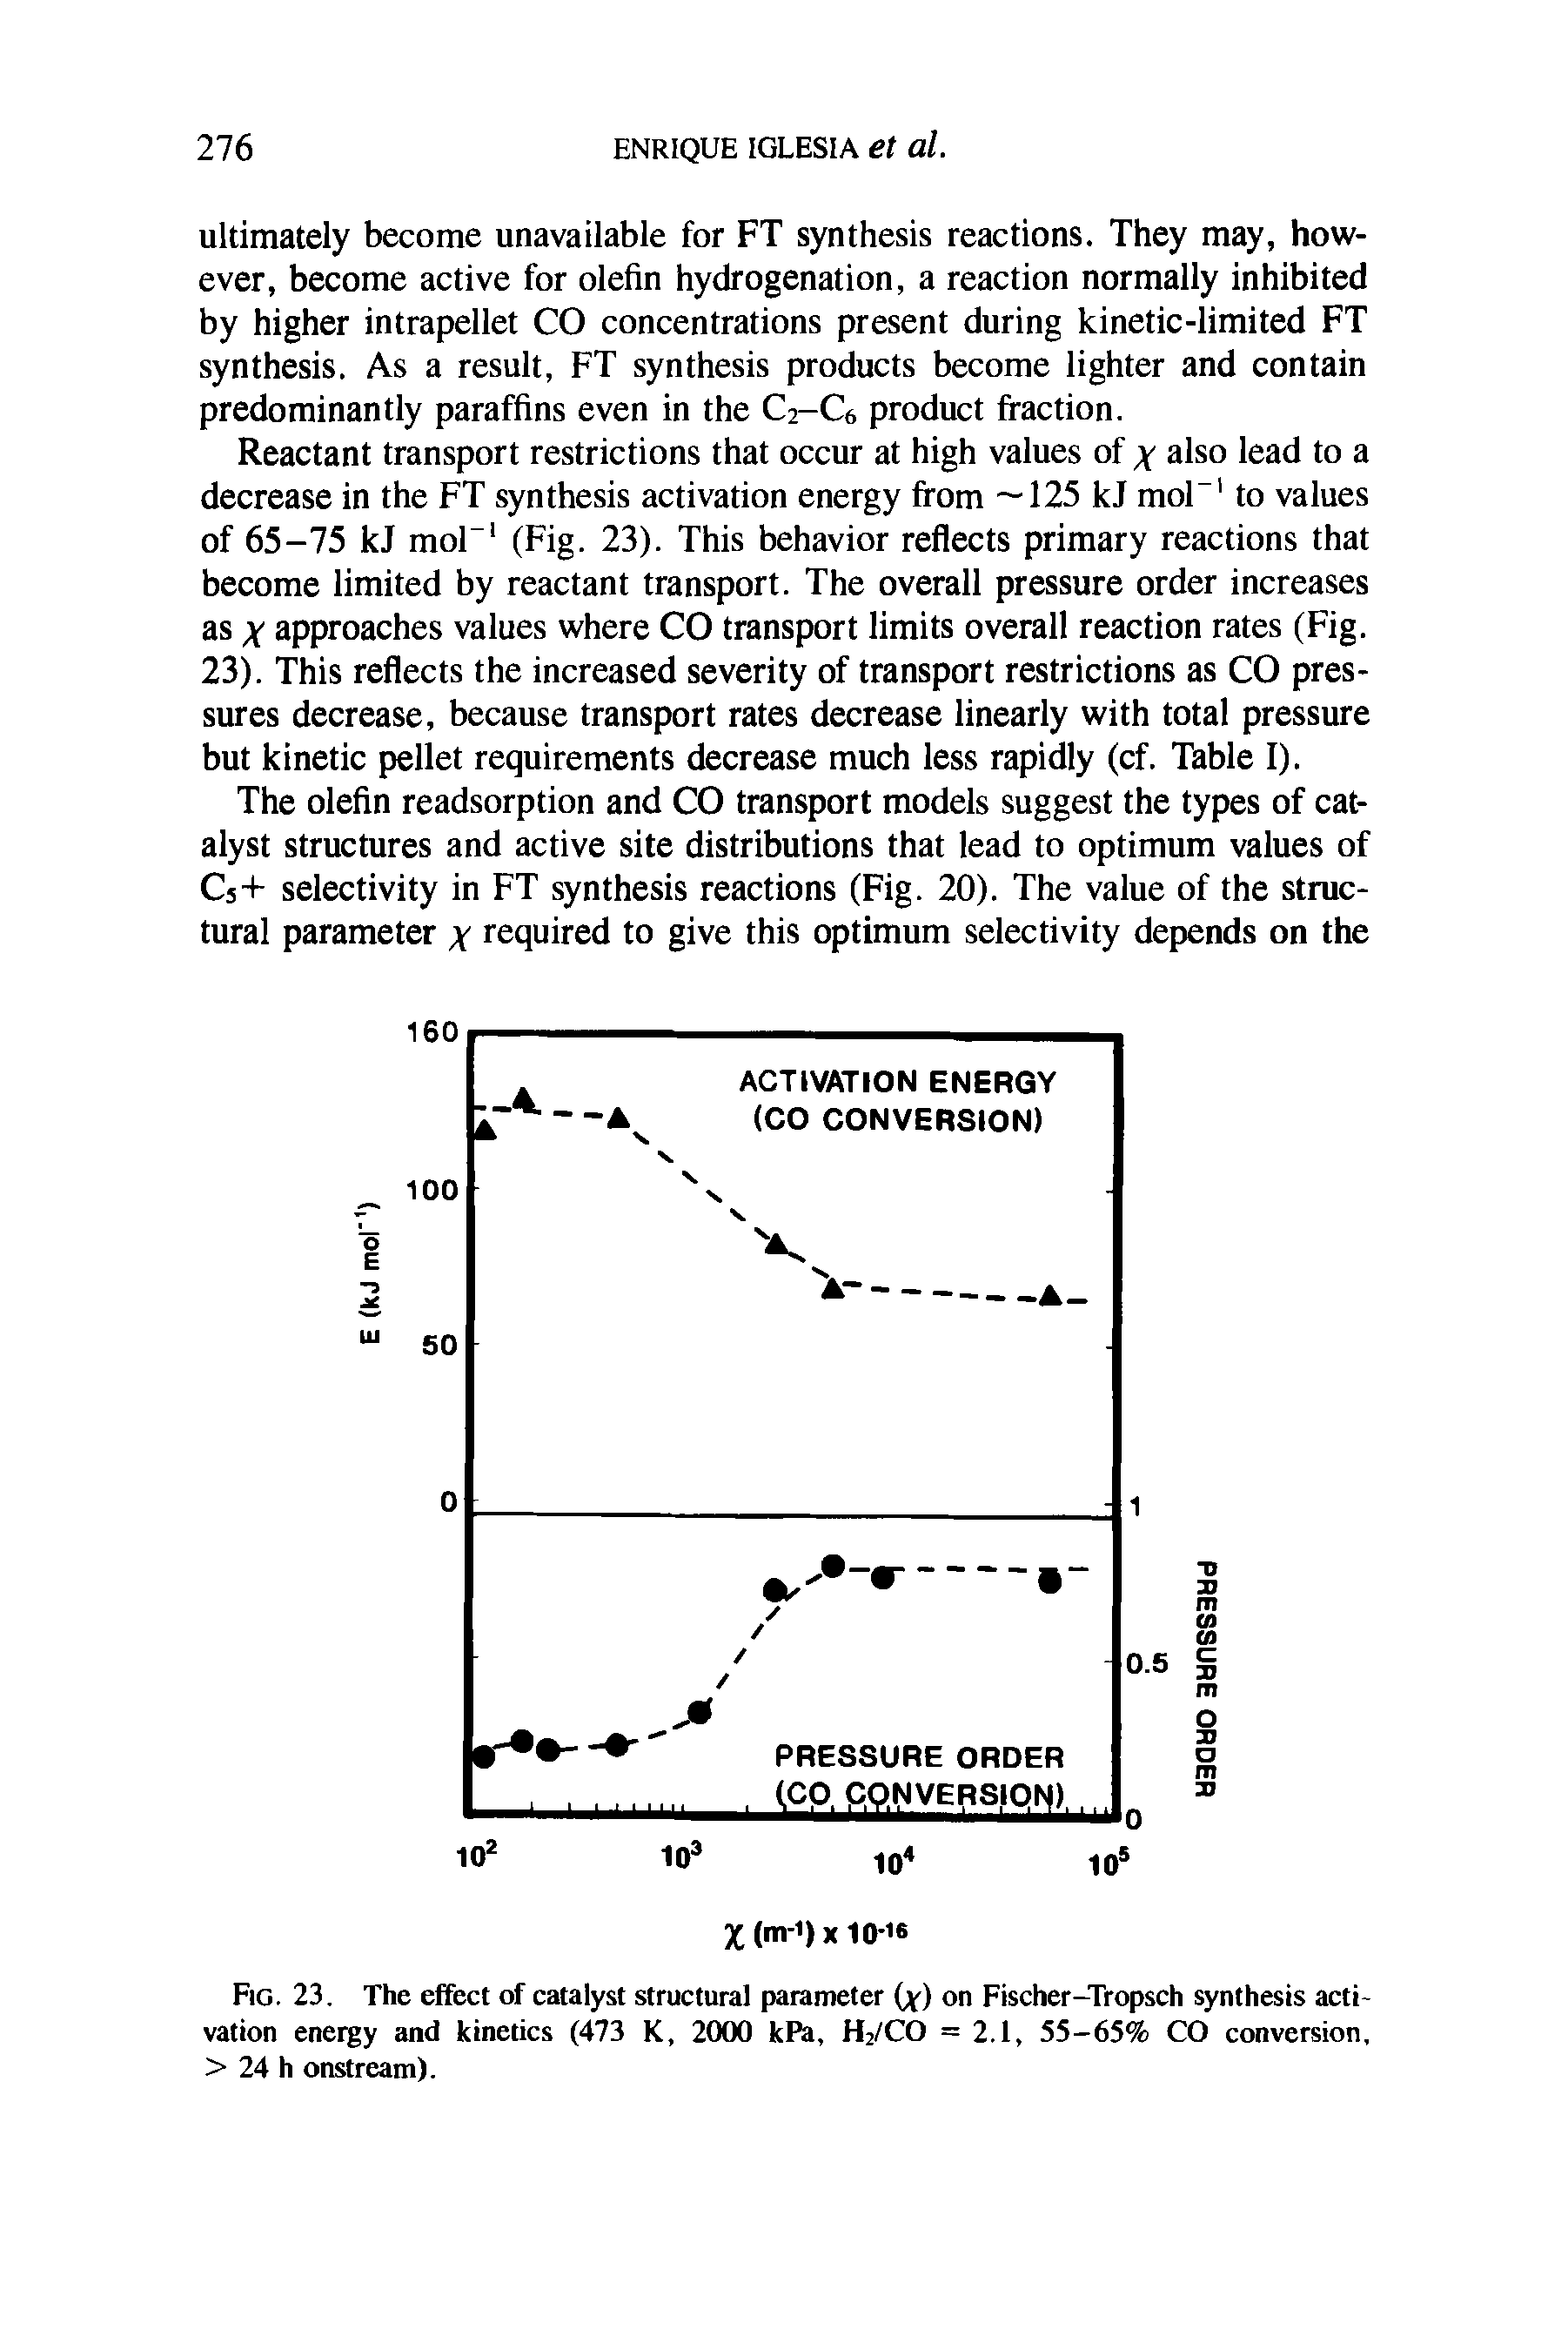 Fig. 23. The effect of catalyst structural parameter ix) on Fischer-Tropsch synthesis activation energy and kinetics (473 K, 2000 kPa, H2/CO = 2.1 55-65% CO conversion, > 24 h onstream).